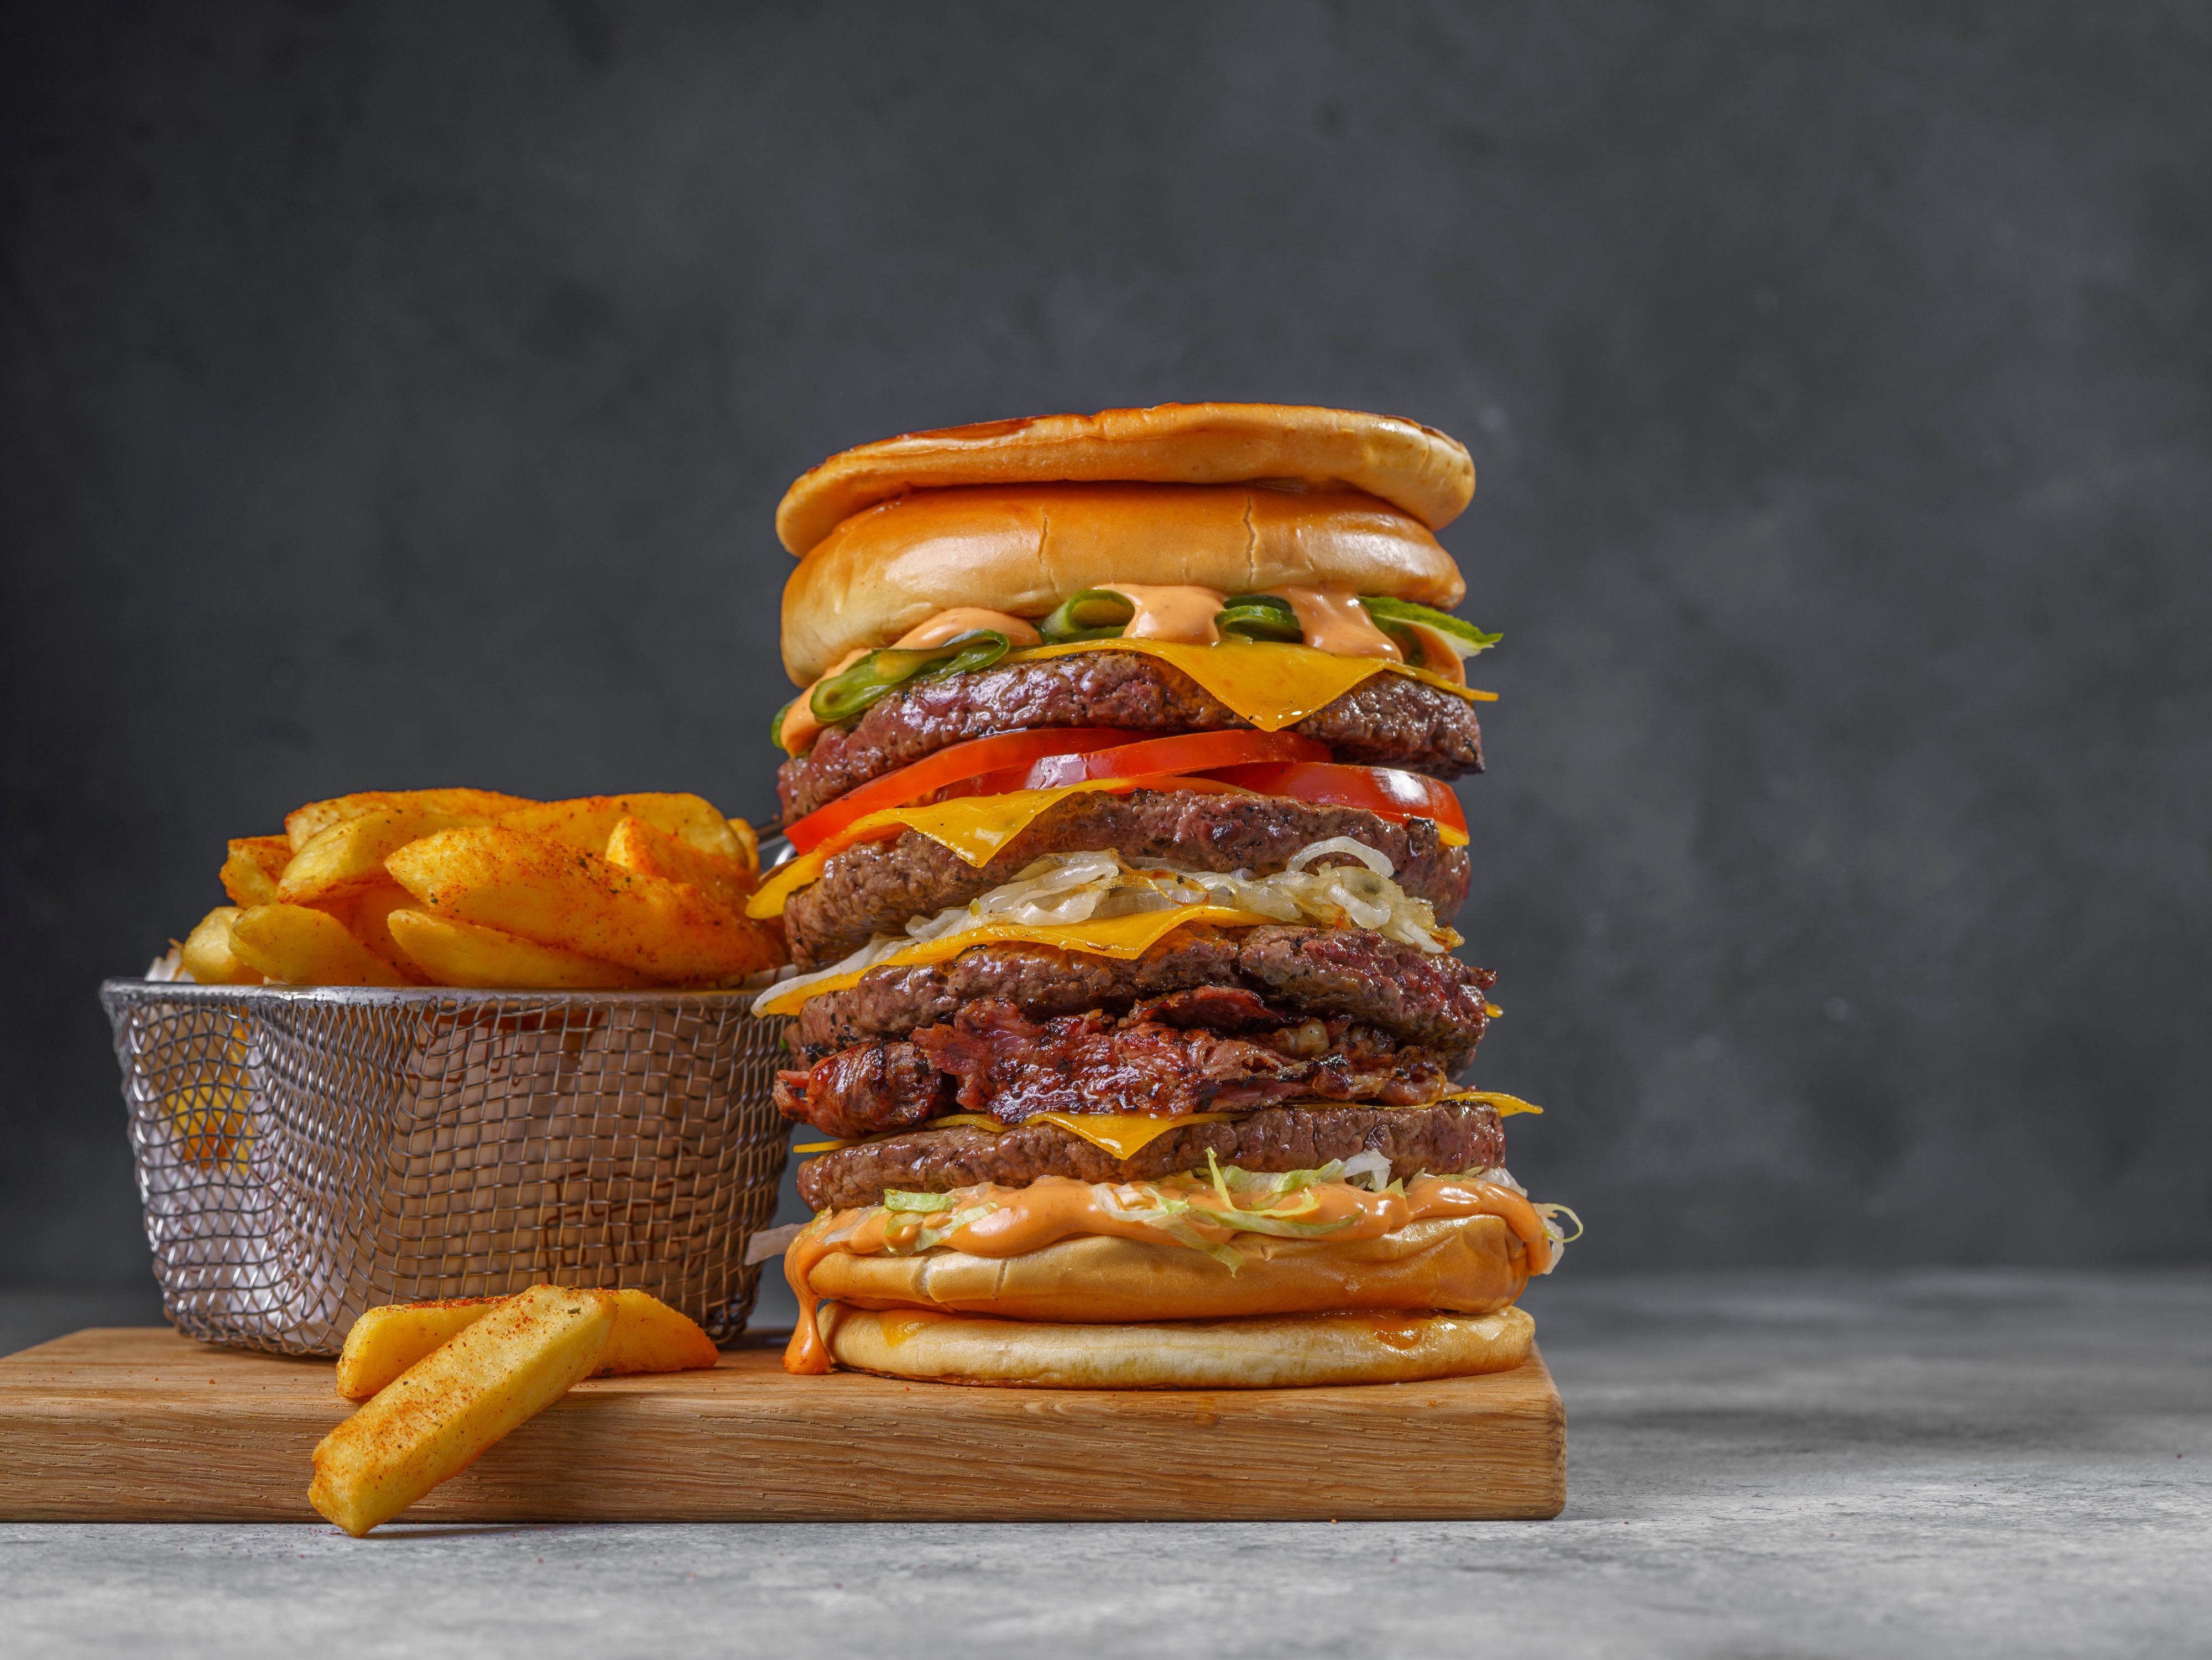 Juicy homemade patties, sauces and all the fixings. One bite and you’ll be transported to burger heaven. 
Starting from AED 60.
Available until July end | 12:30 pm onward.
For bookings, please call 050 667 5815.